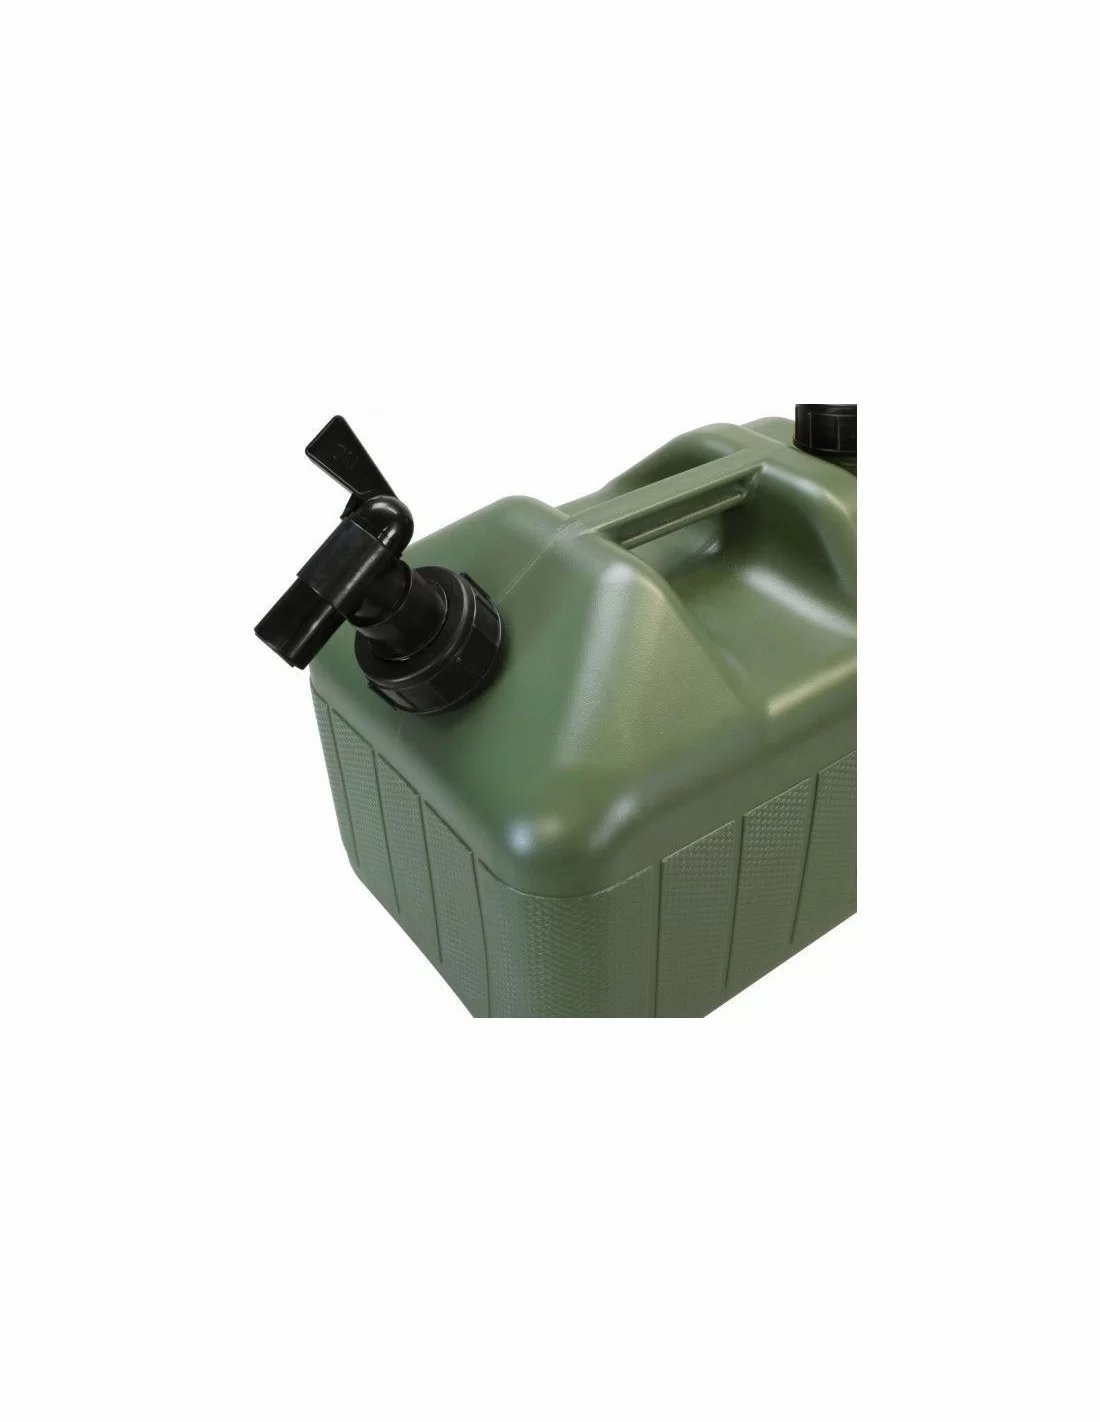 Fatbox Water Carrier 18l туба за вода